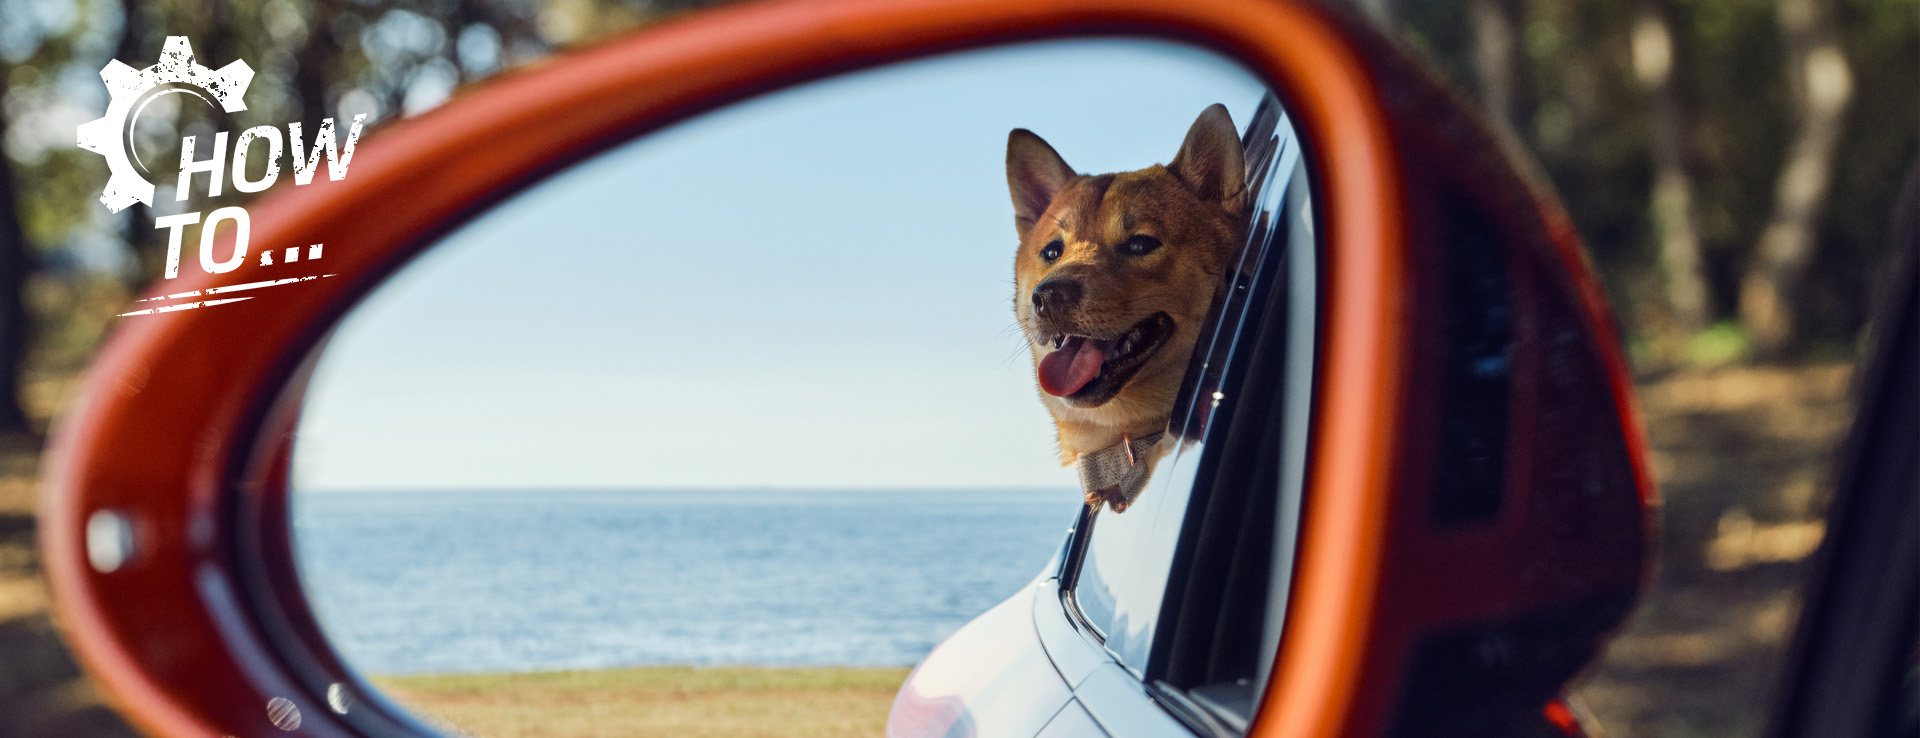 Dog leaning out of car window, reflected in door mirror